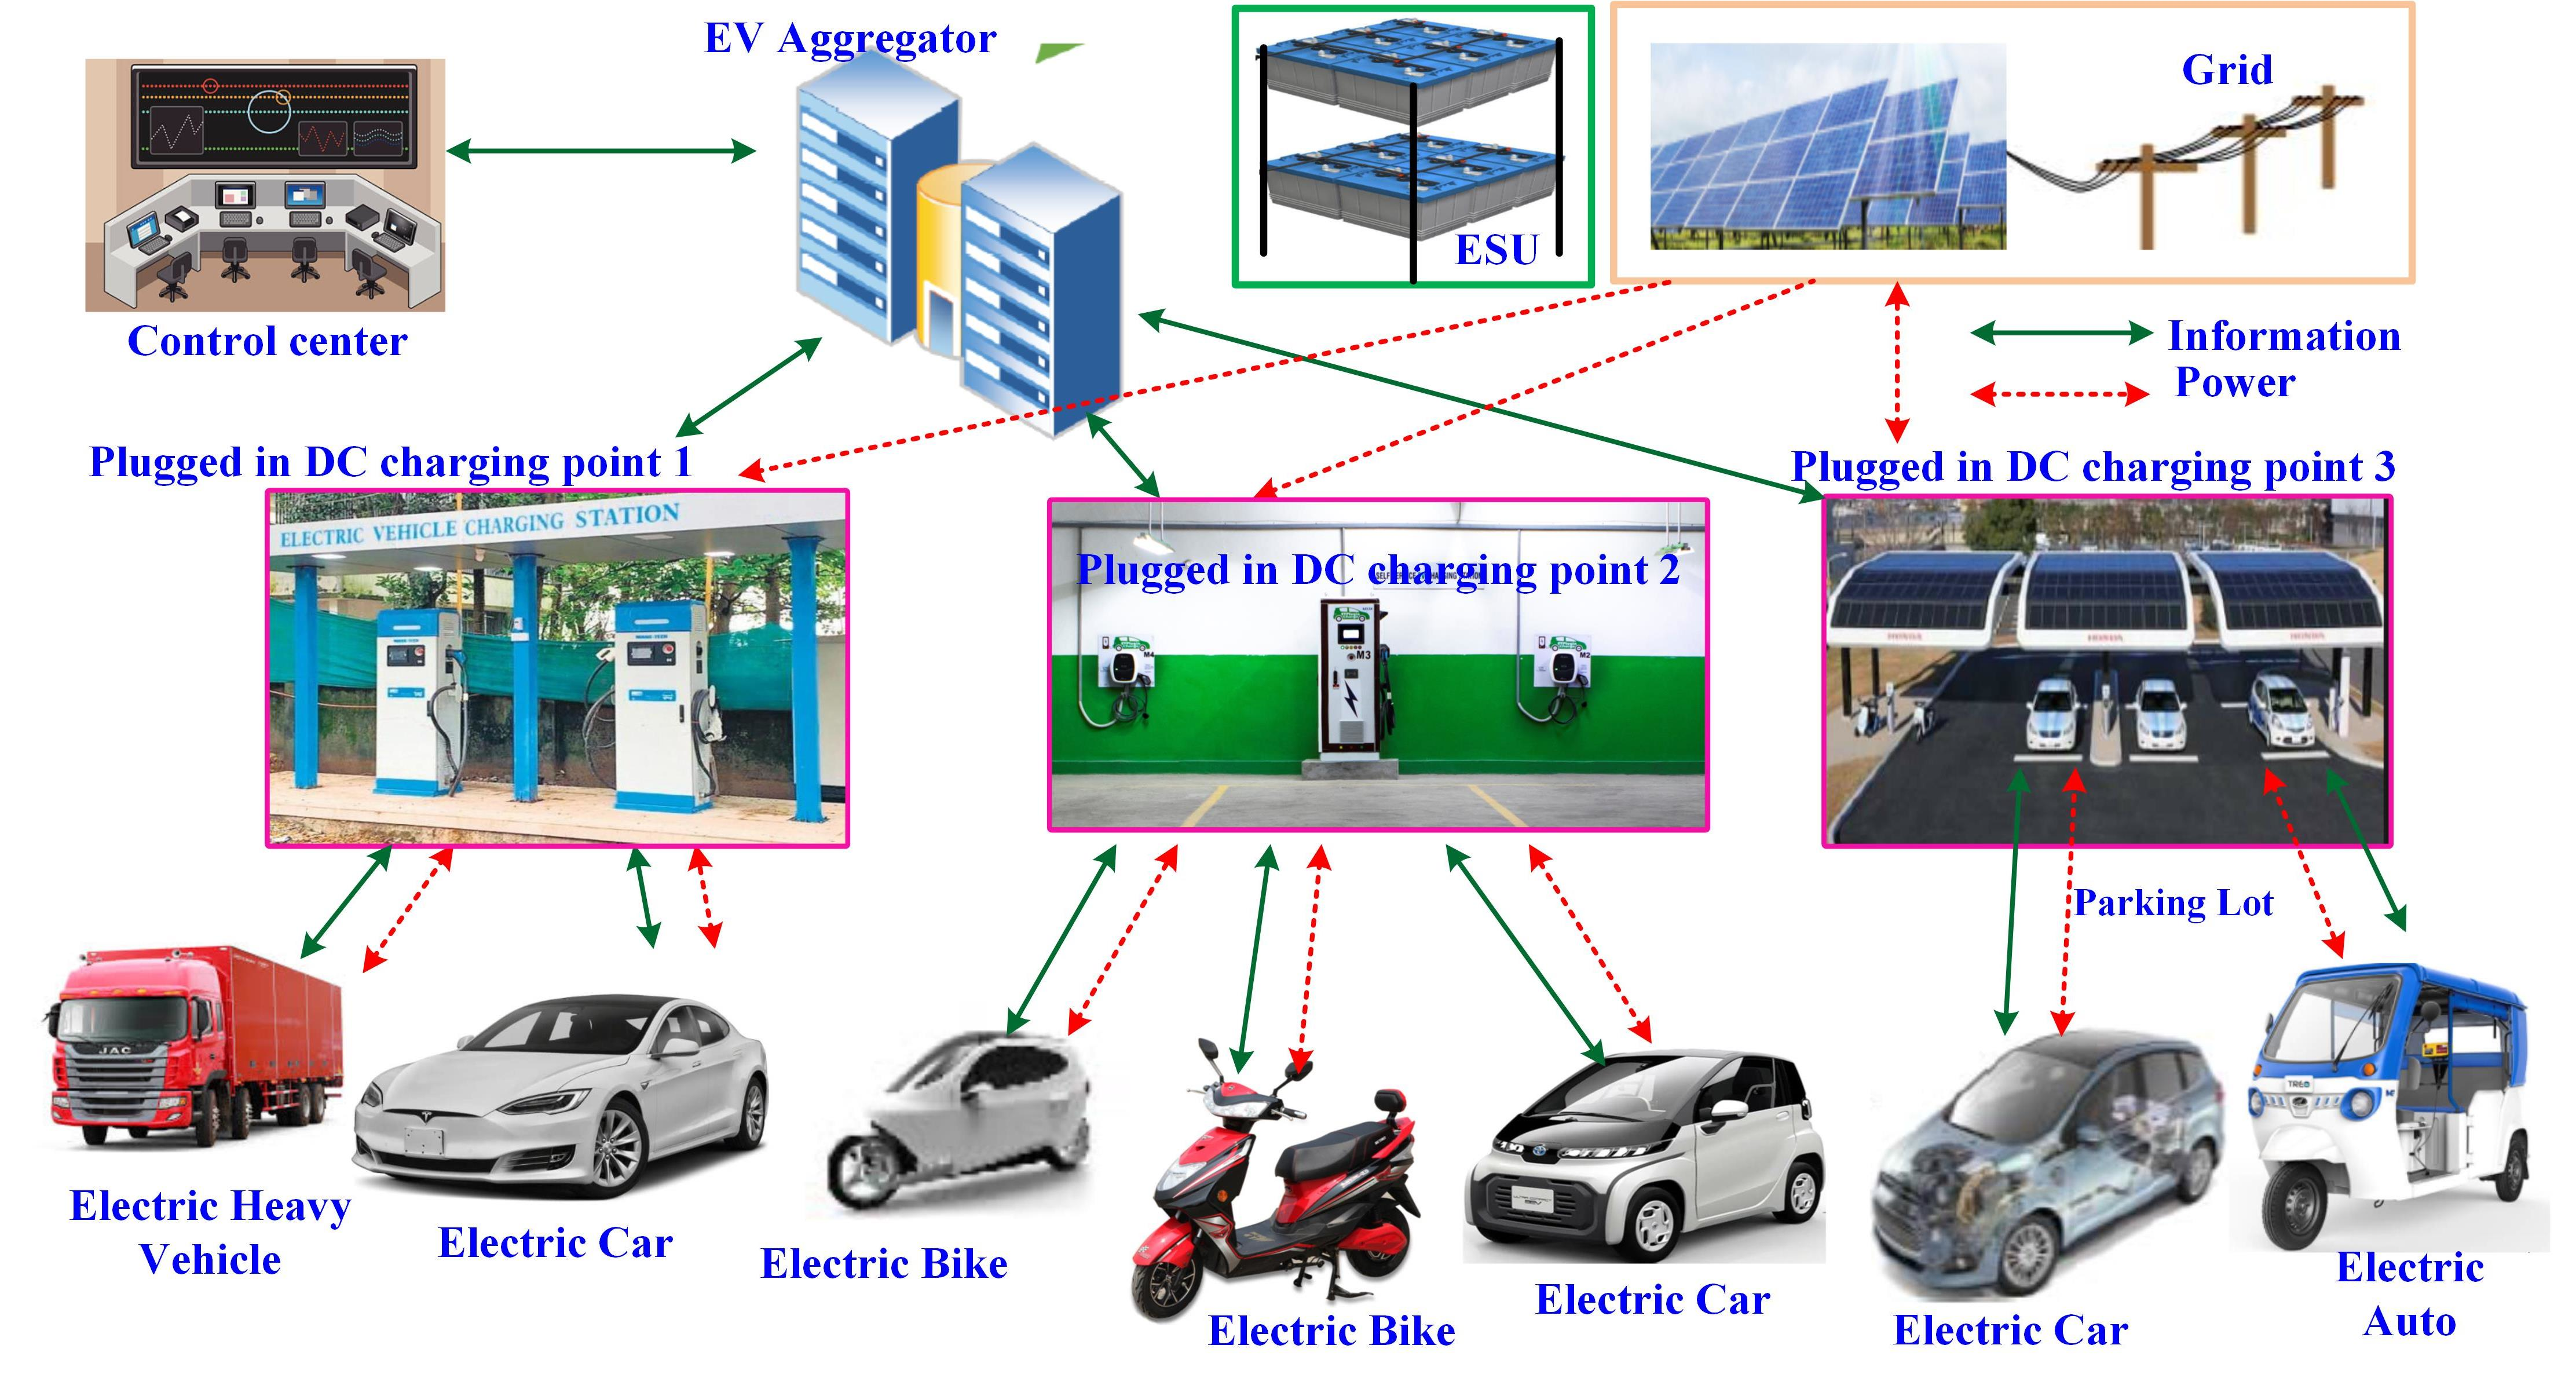 An Overview of Electric Vehicle Charging Station Infrastructure